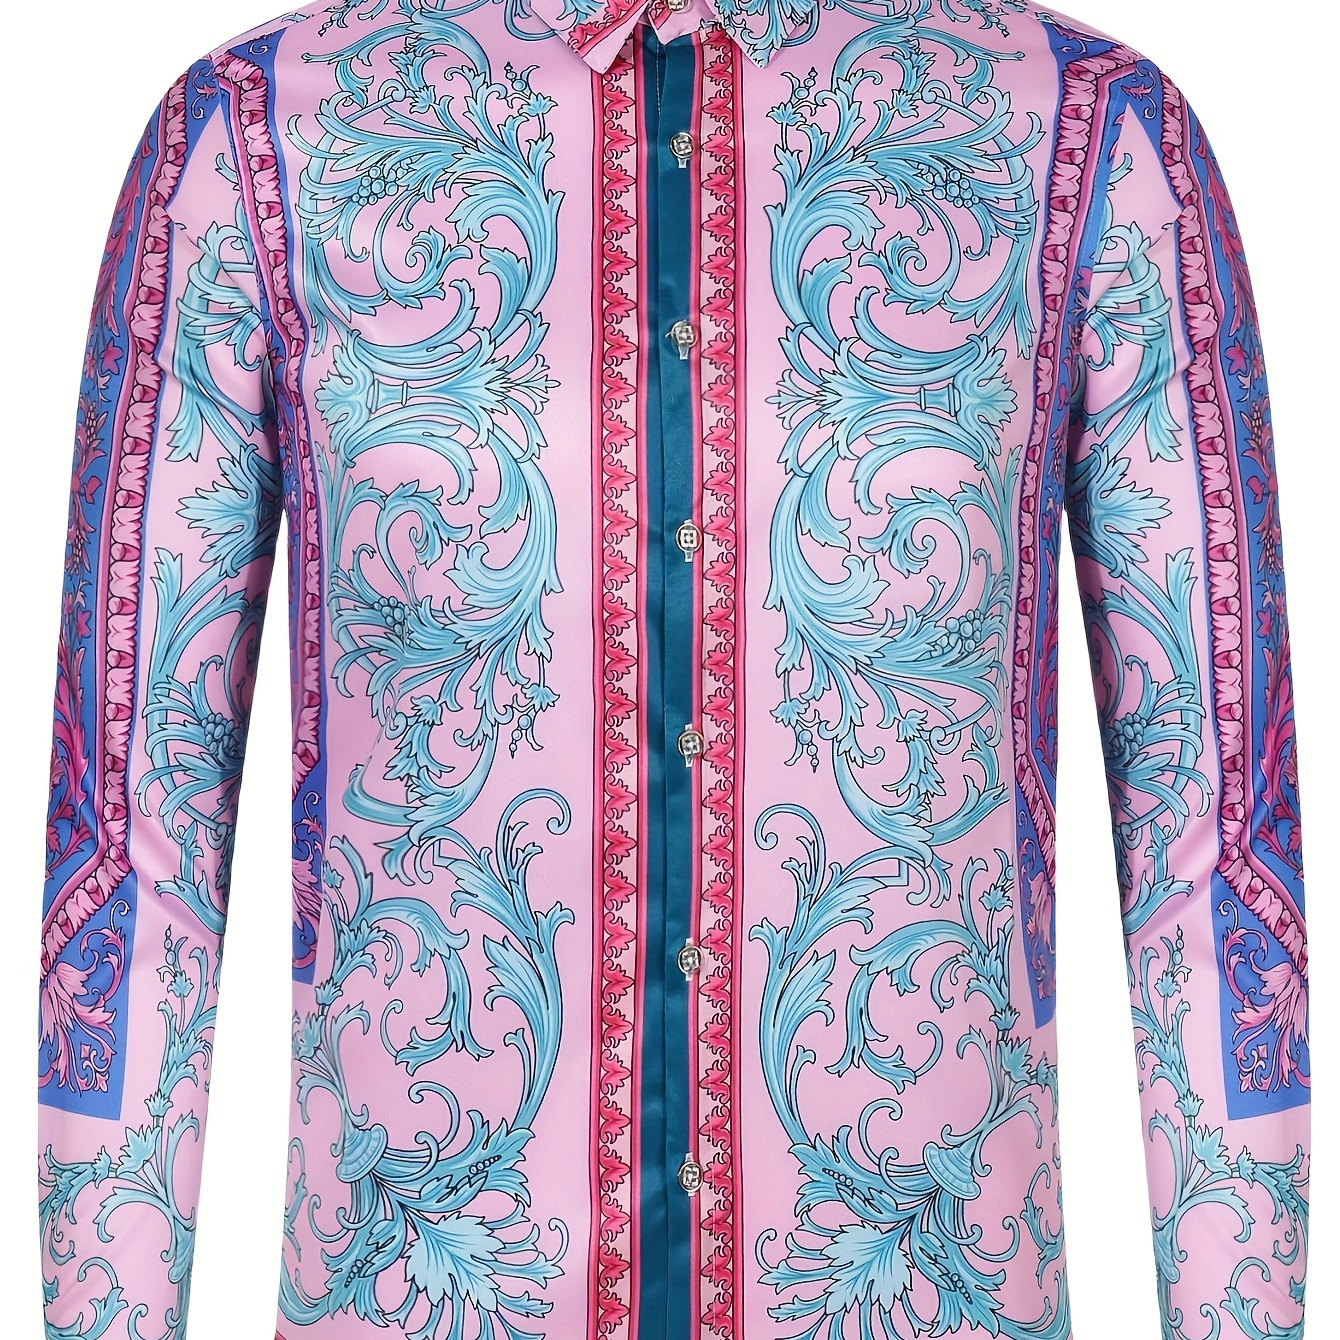 

Retro Style Color Block Floral Pattern Men's Long Sleeve Button Up Shirt For Spring Fall Daily Vacation Party